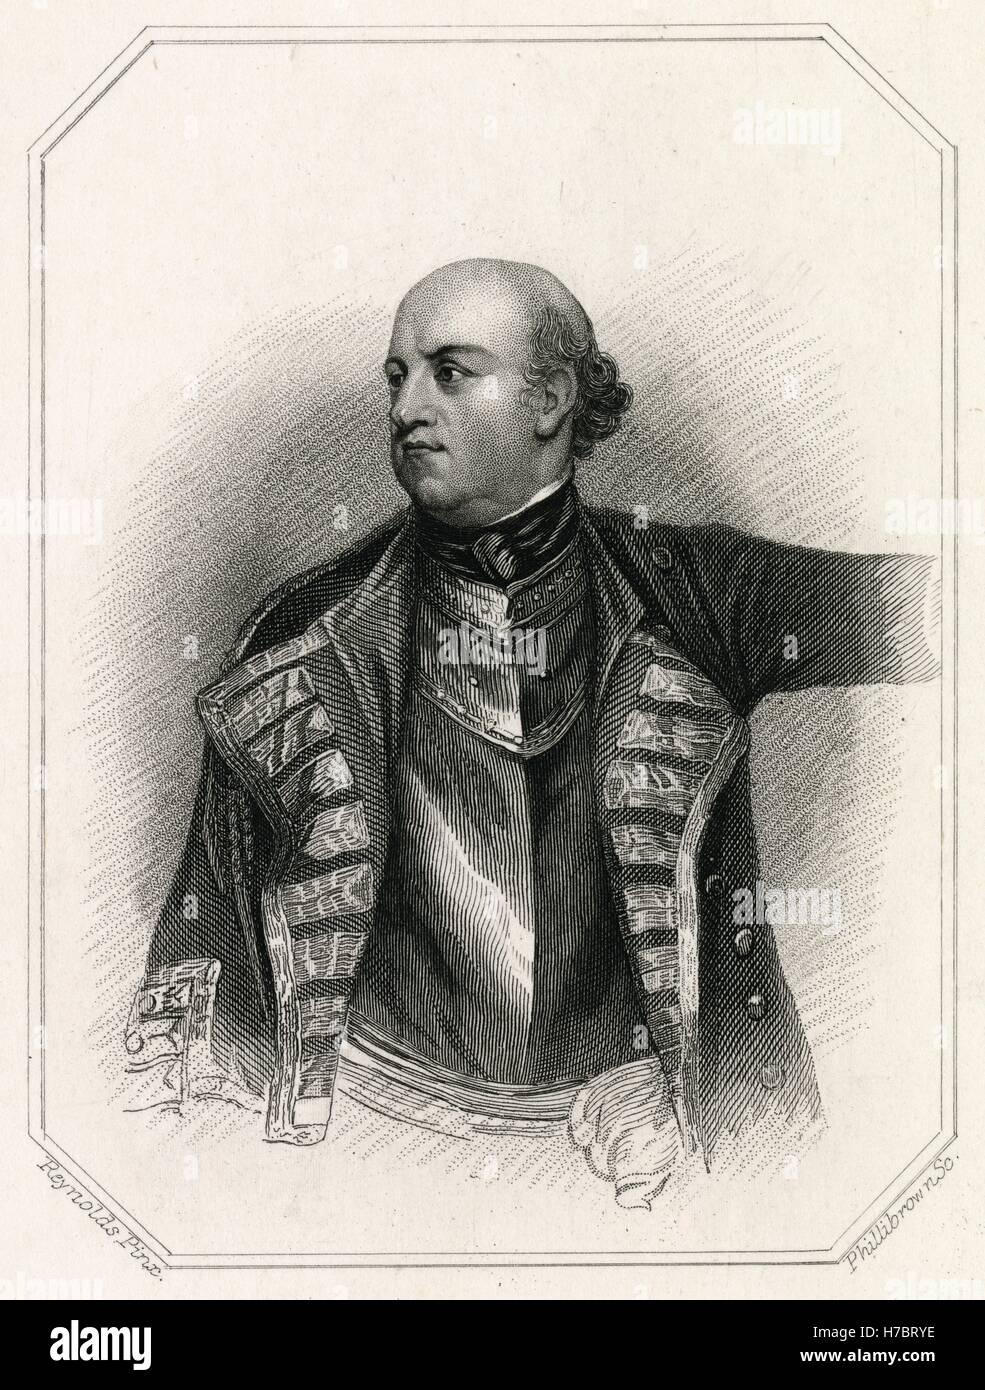 Antique c1840 engraving, John Manners, Marquess of Granby. Lieutenant-General John Manners, Marquess of Granby PC, (2 January 1721 – 18 October 1770), British soldier, was the eldest son of the 3rd Duke of Rutland. SOURCE: ORIGINAL ENGRAVING. Stock Photo